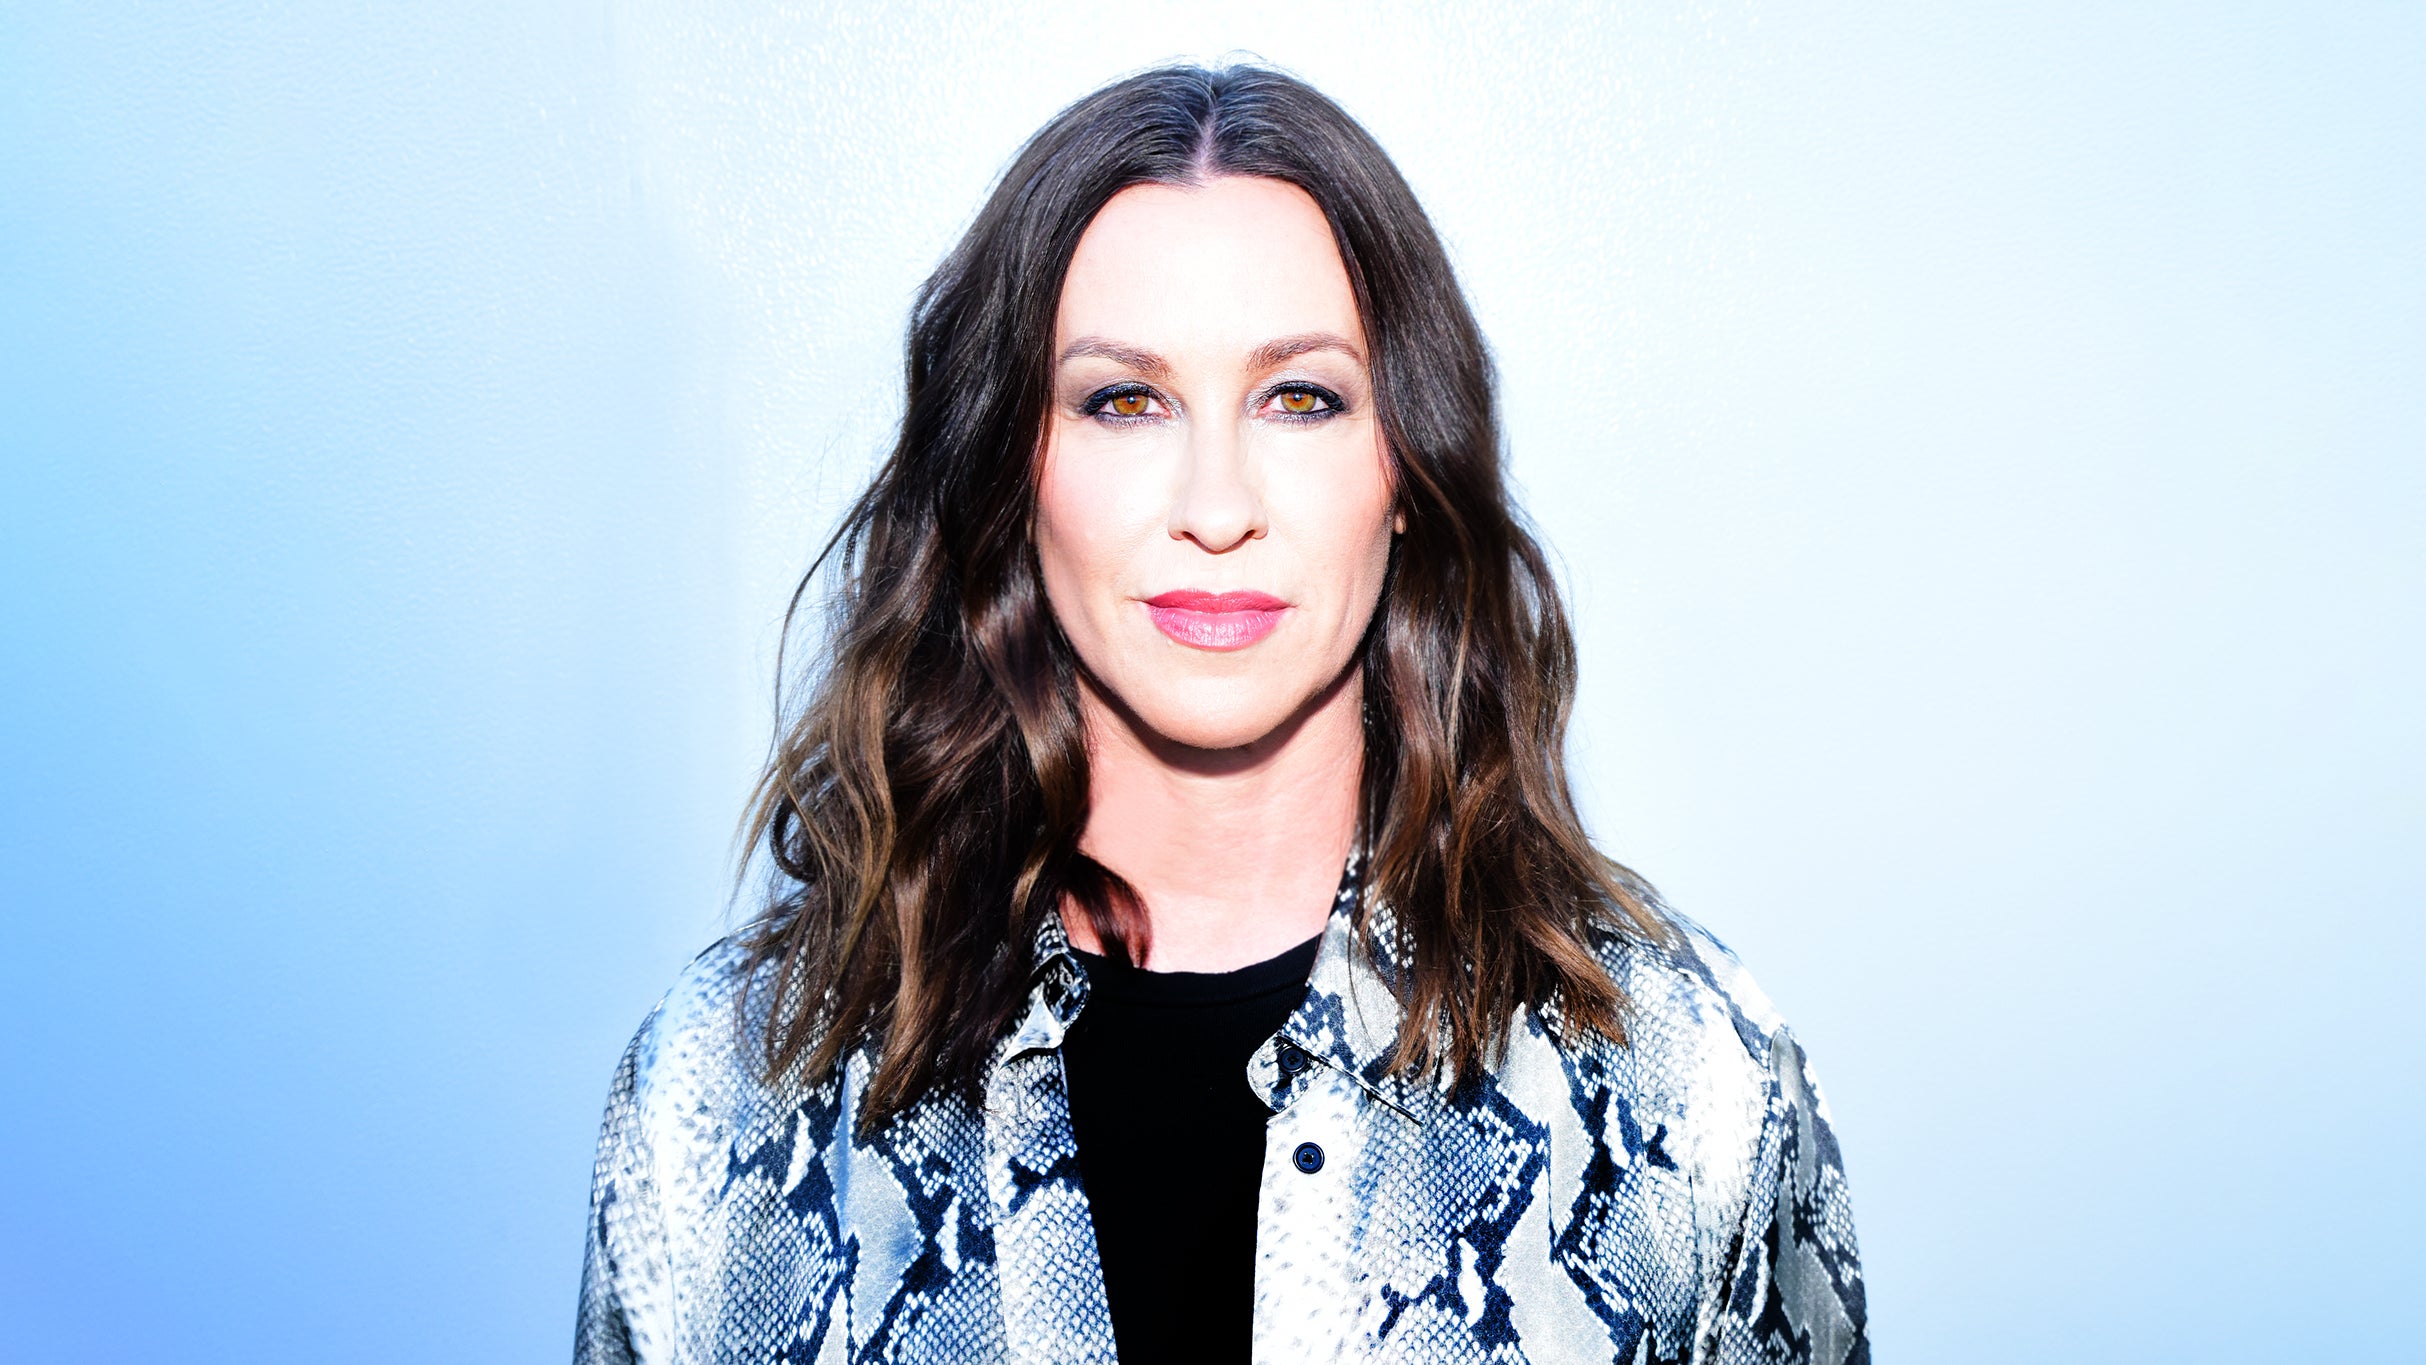 presale code for Alanis Morissette - The Triple Moon Tour tickets in Toronto - ON (Budweiser Stage)